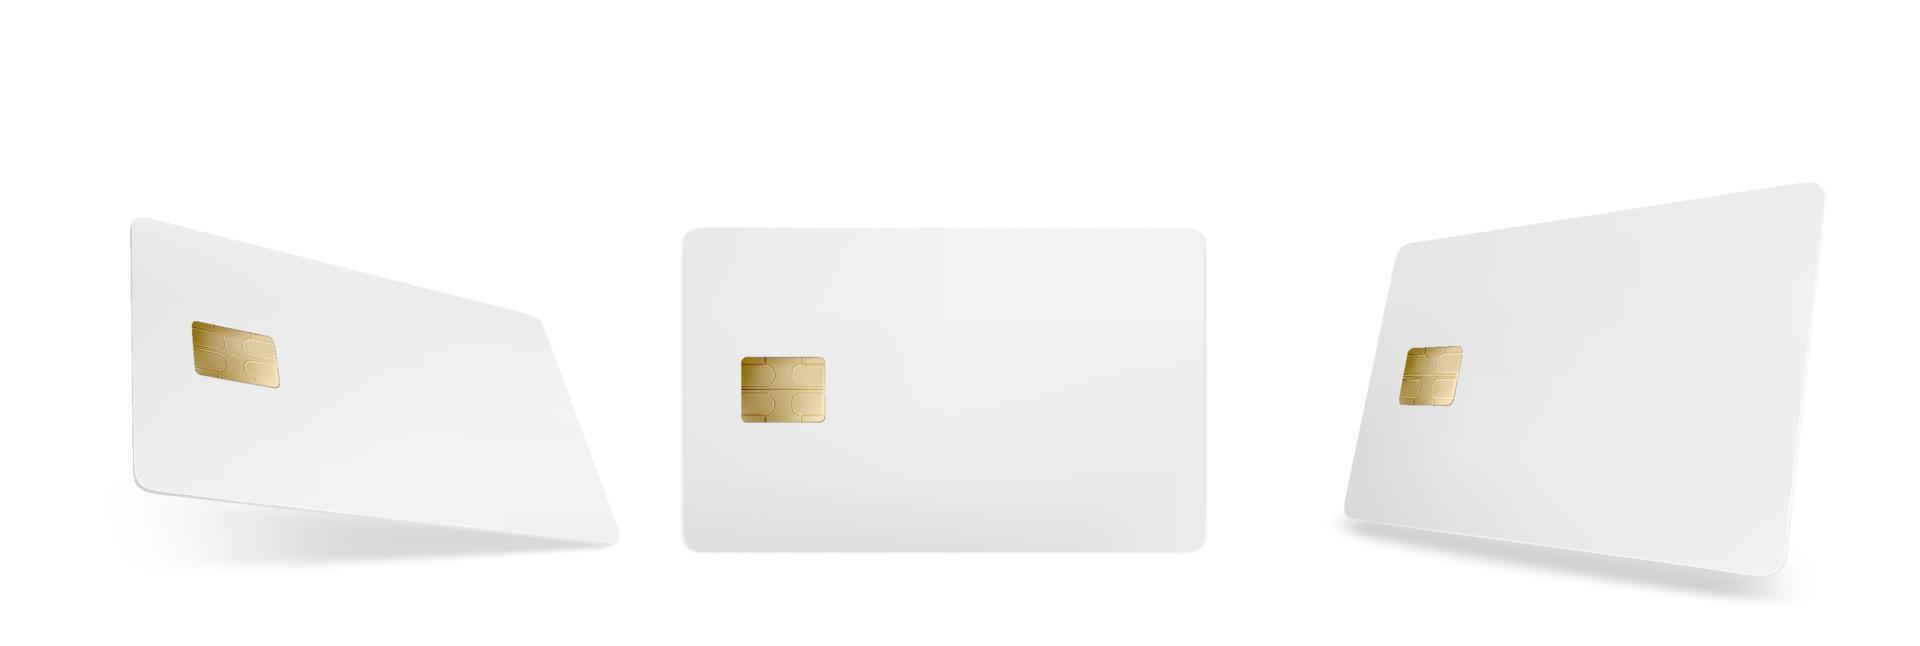 Credit card mockup, isolated template with chip vector